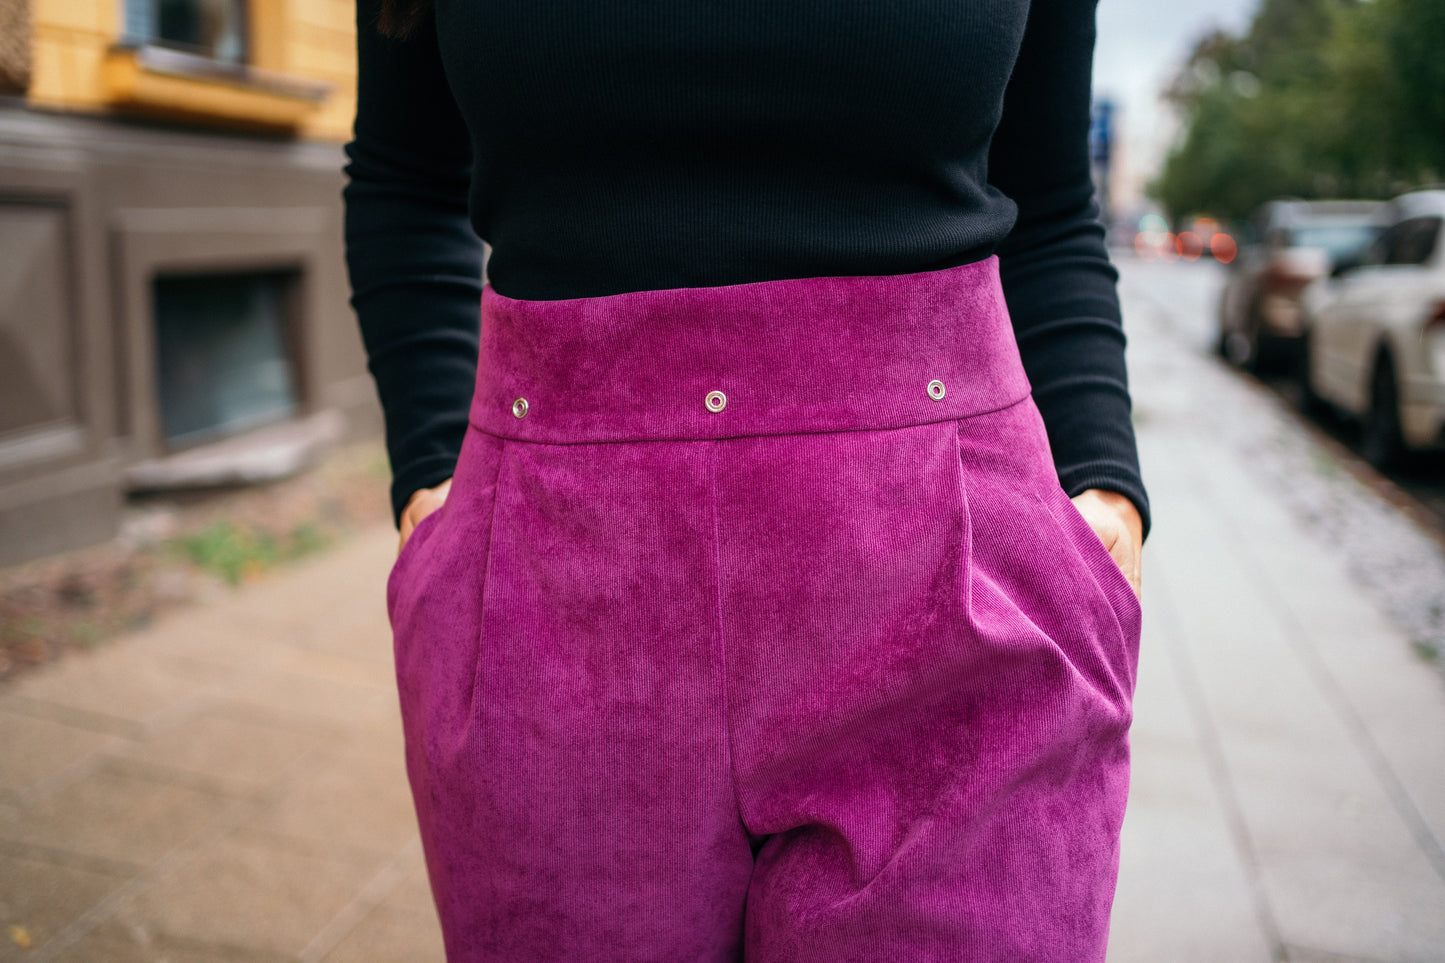 Classic style pants with pockets